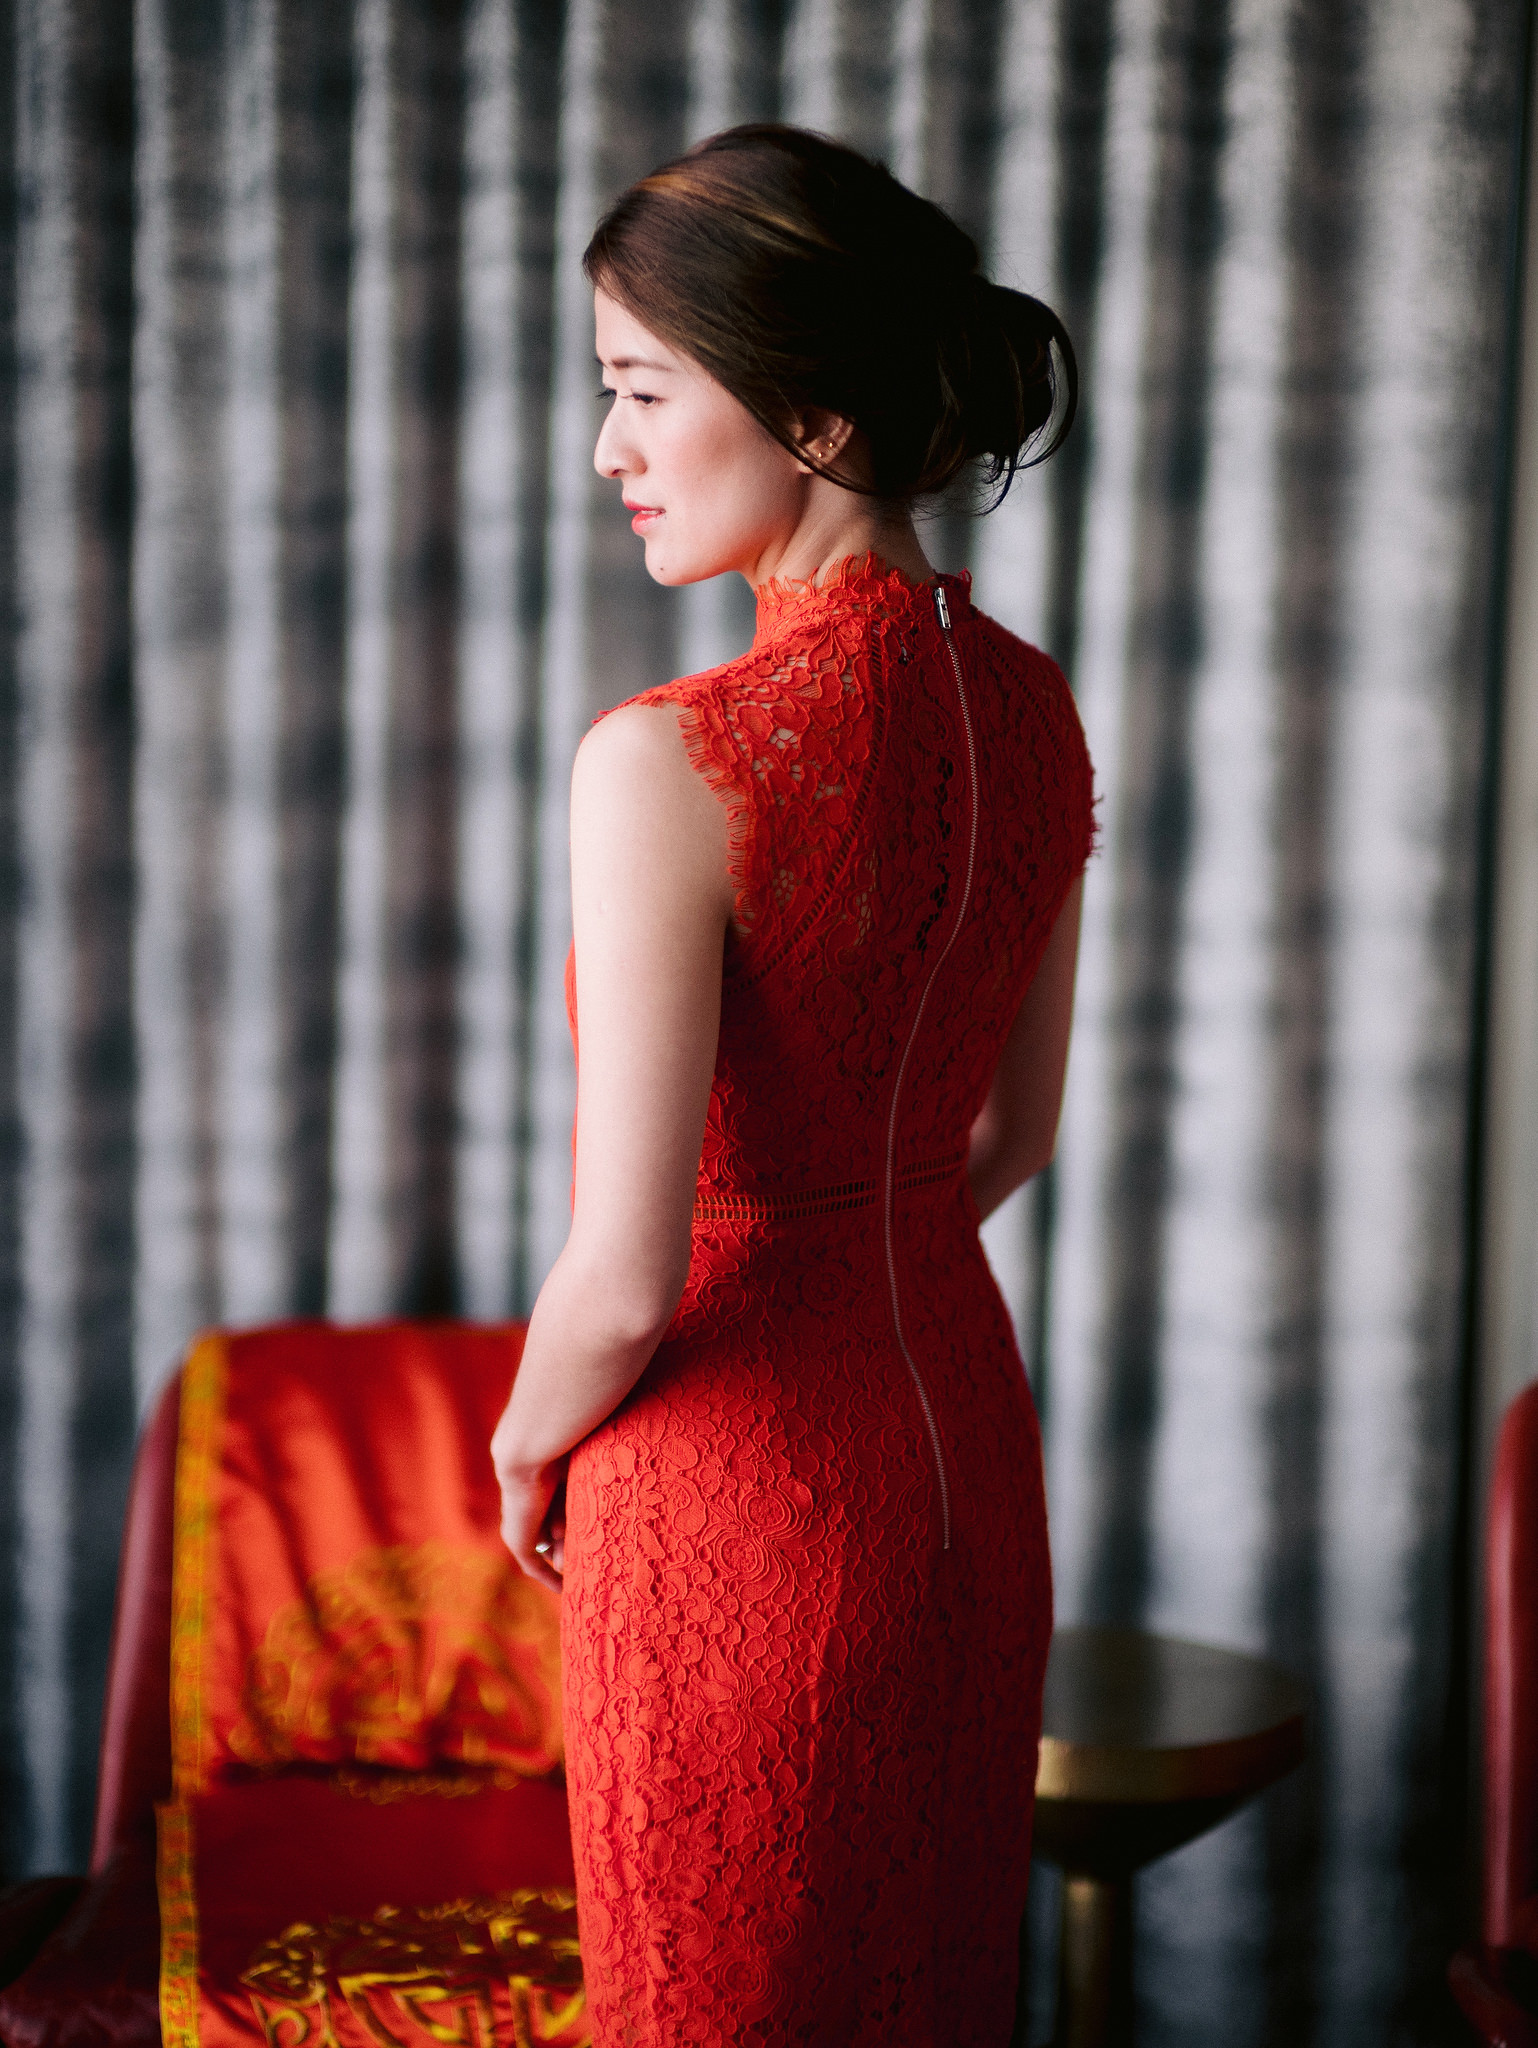 The bride is wearing a red wedding dress for a love month wedding. Image by Jenny Fu Studio